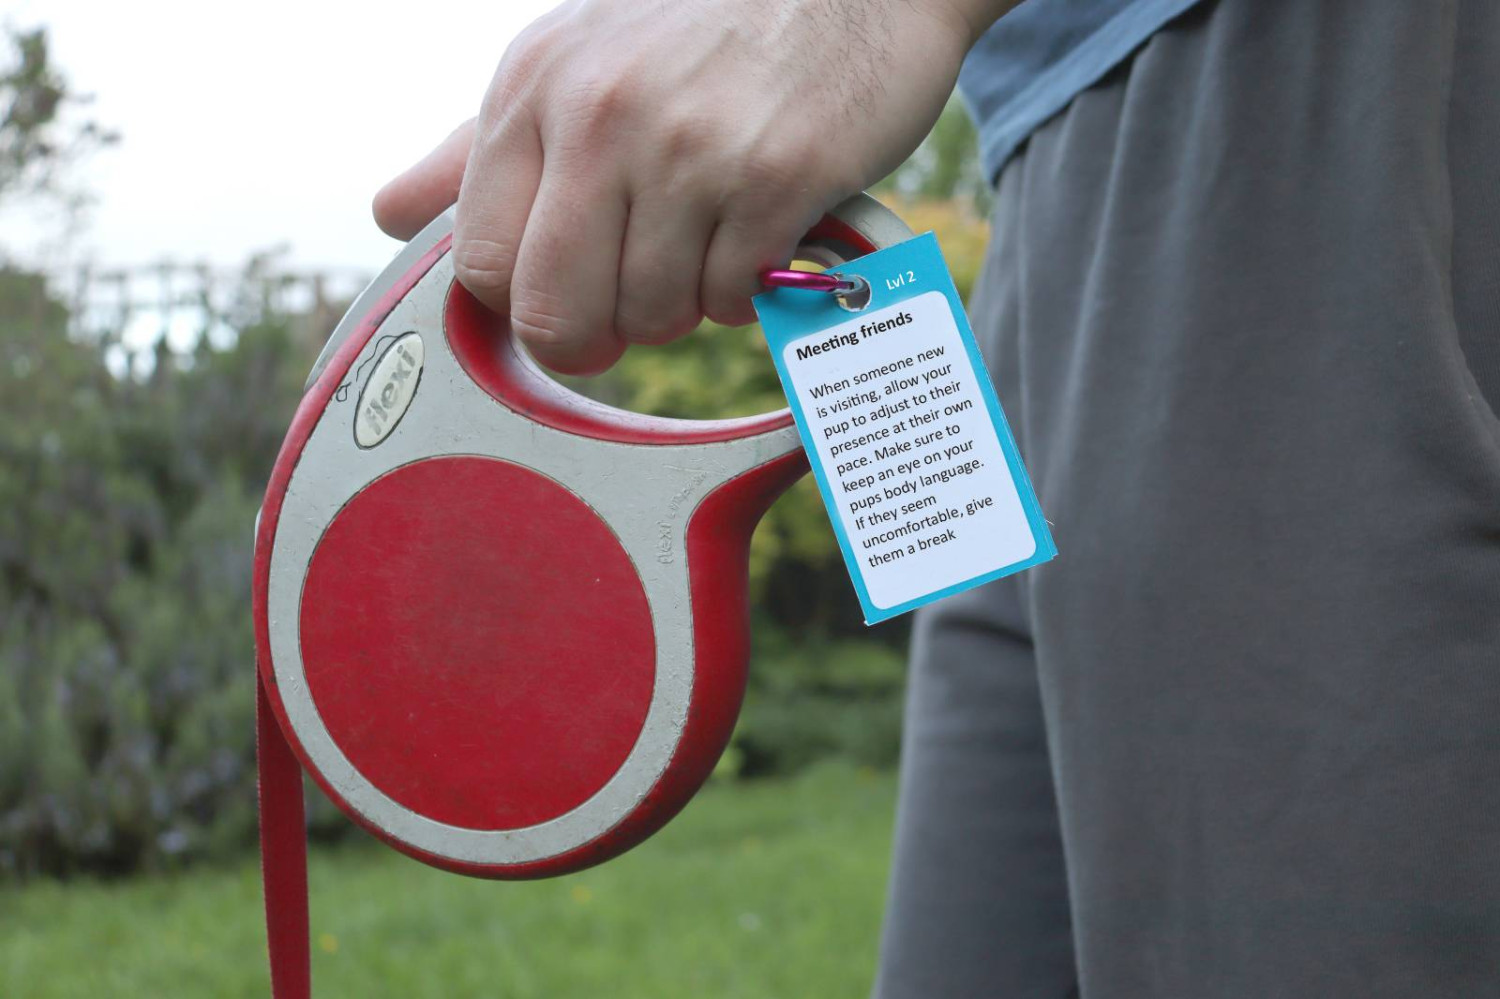 Training cards can be attached to your leash, allowing for training reminders on the go.